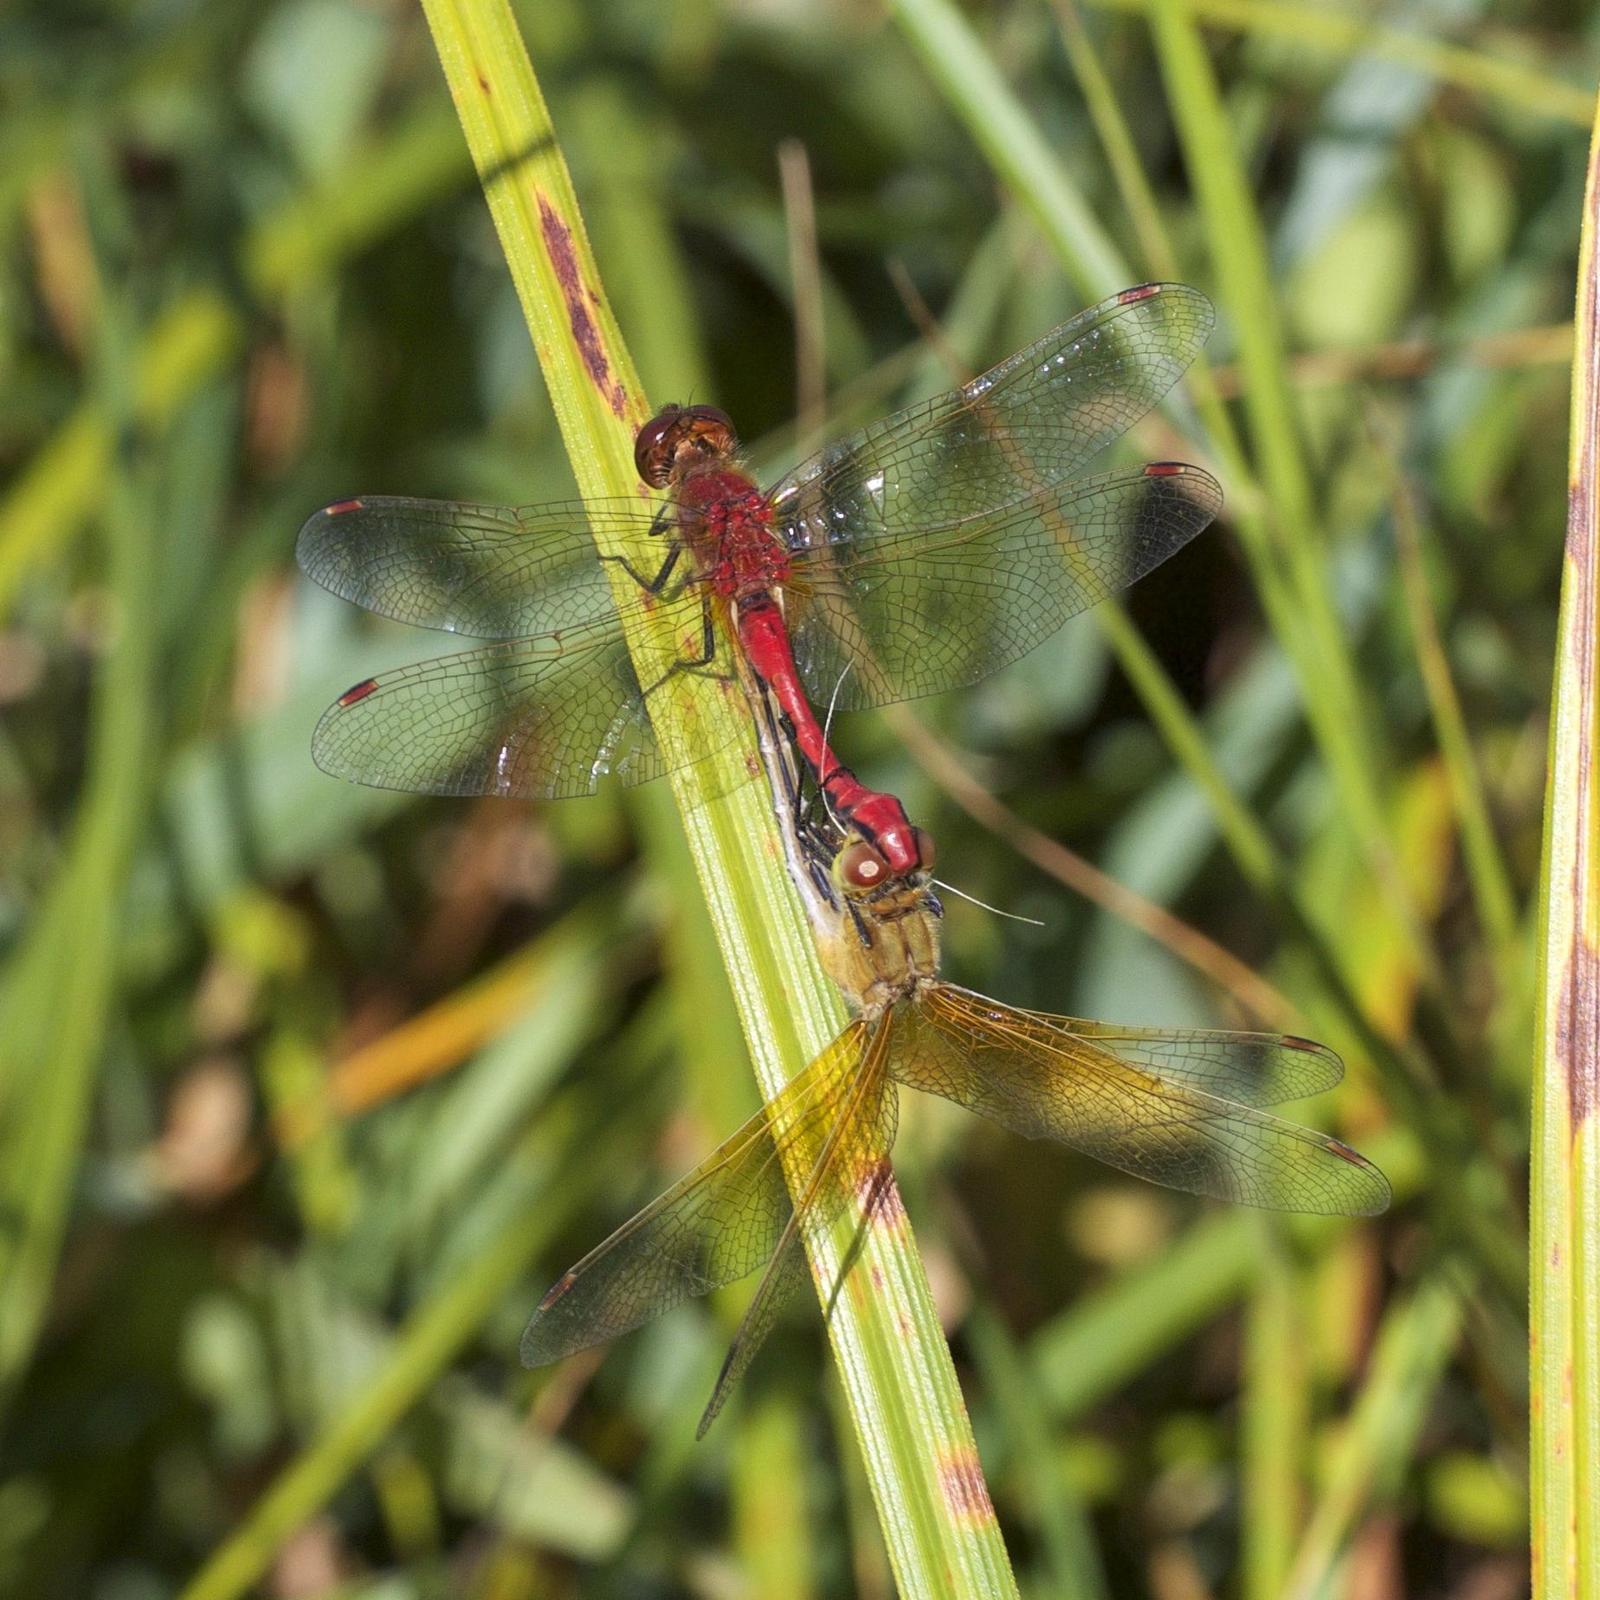 Cherry-faced Meadowhawk Photo by Scott King